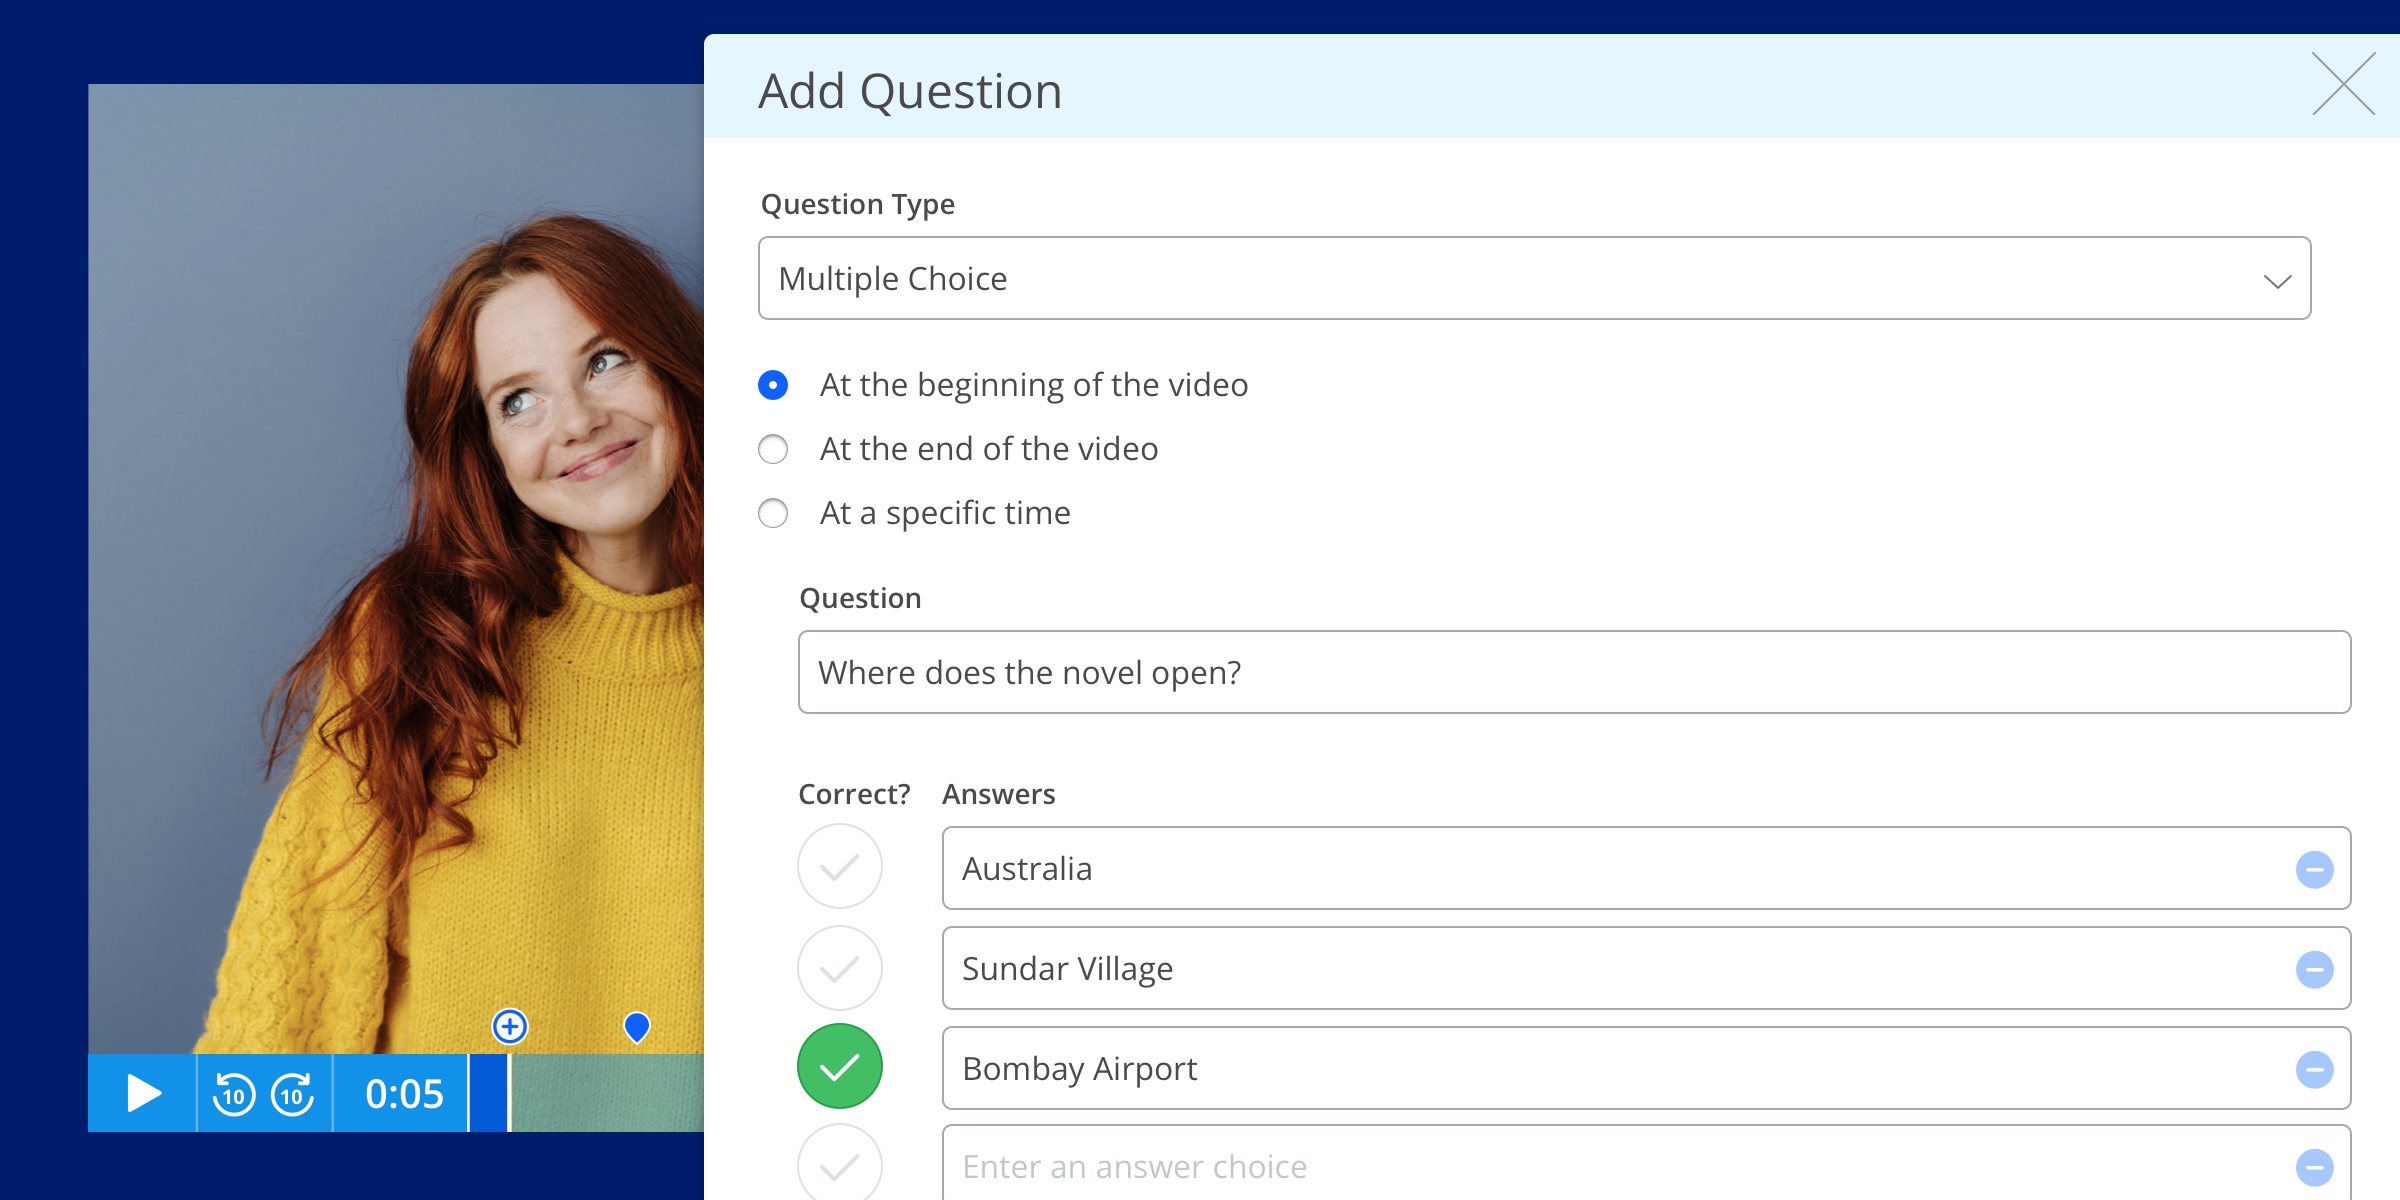 Teachers can use video quizzes and polls for formative assessments, student engagement, and interactive learning in any classroom environment.